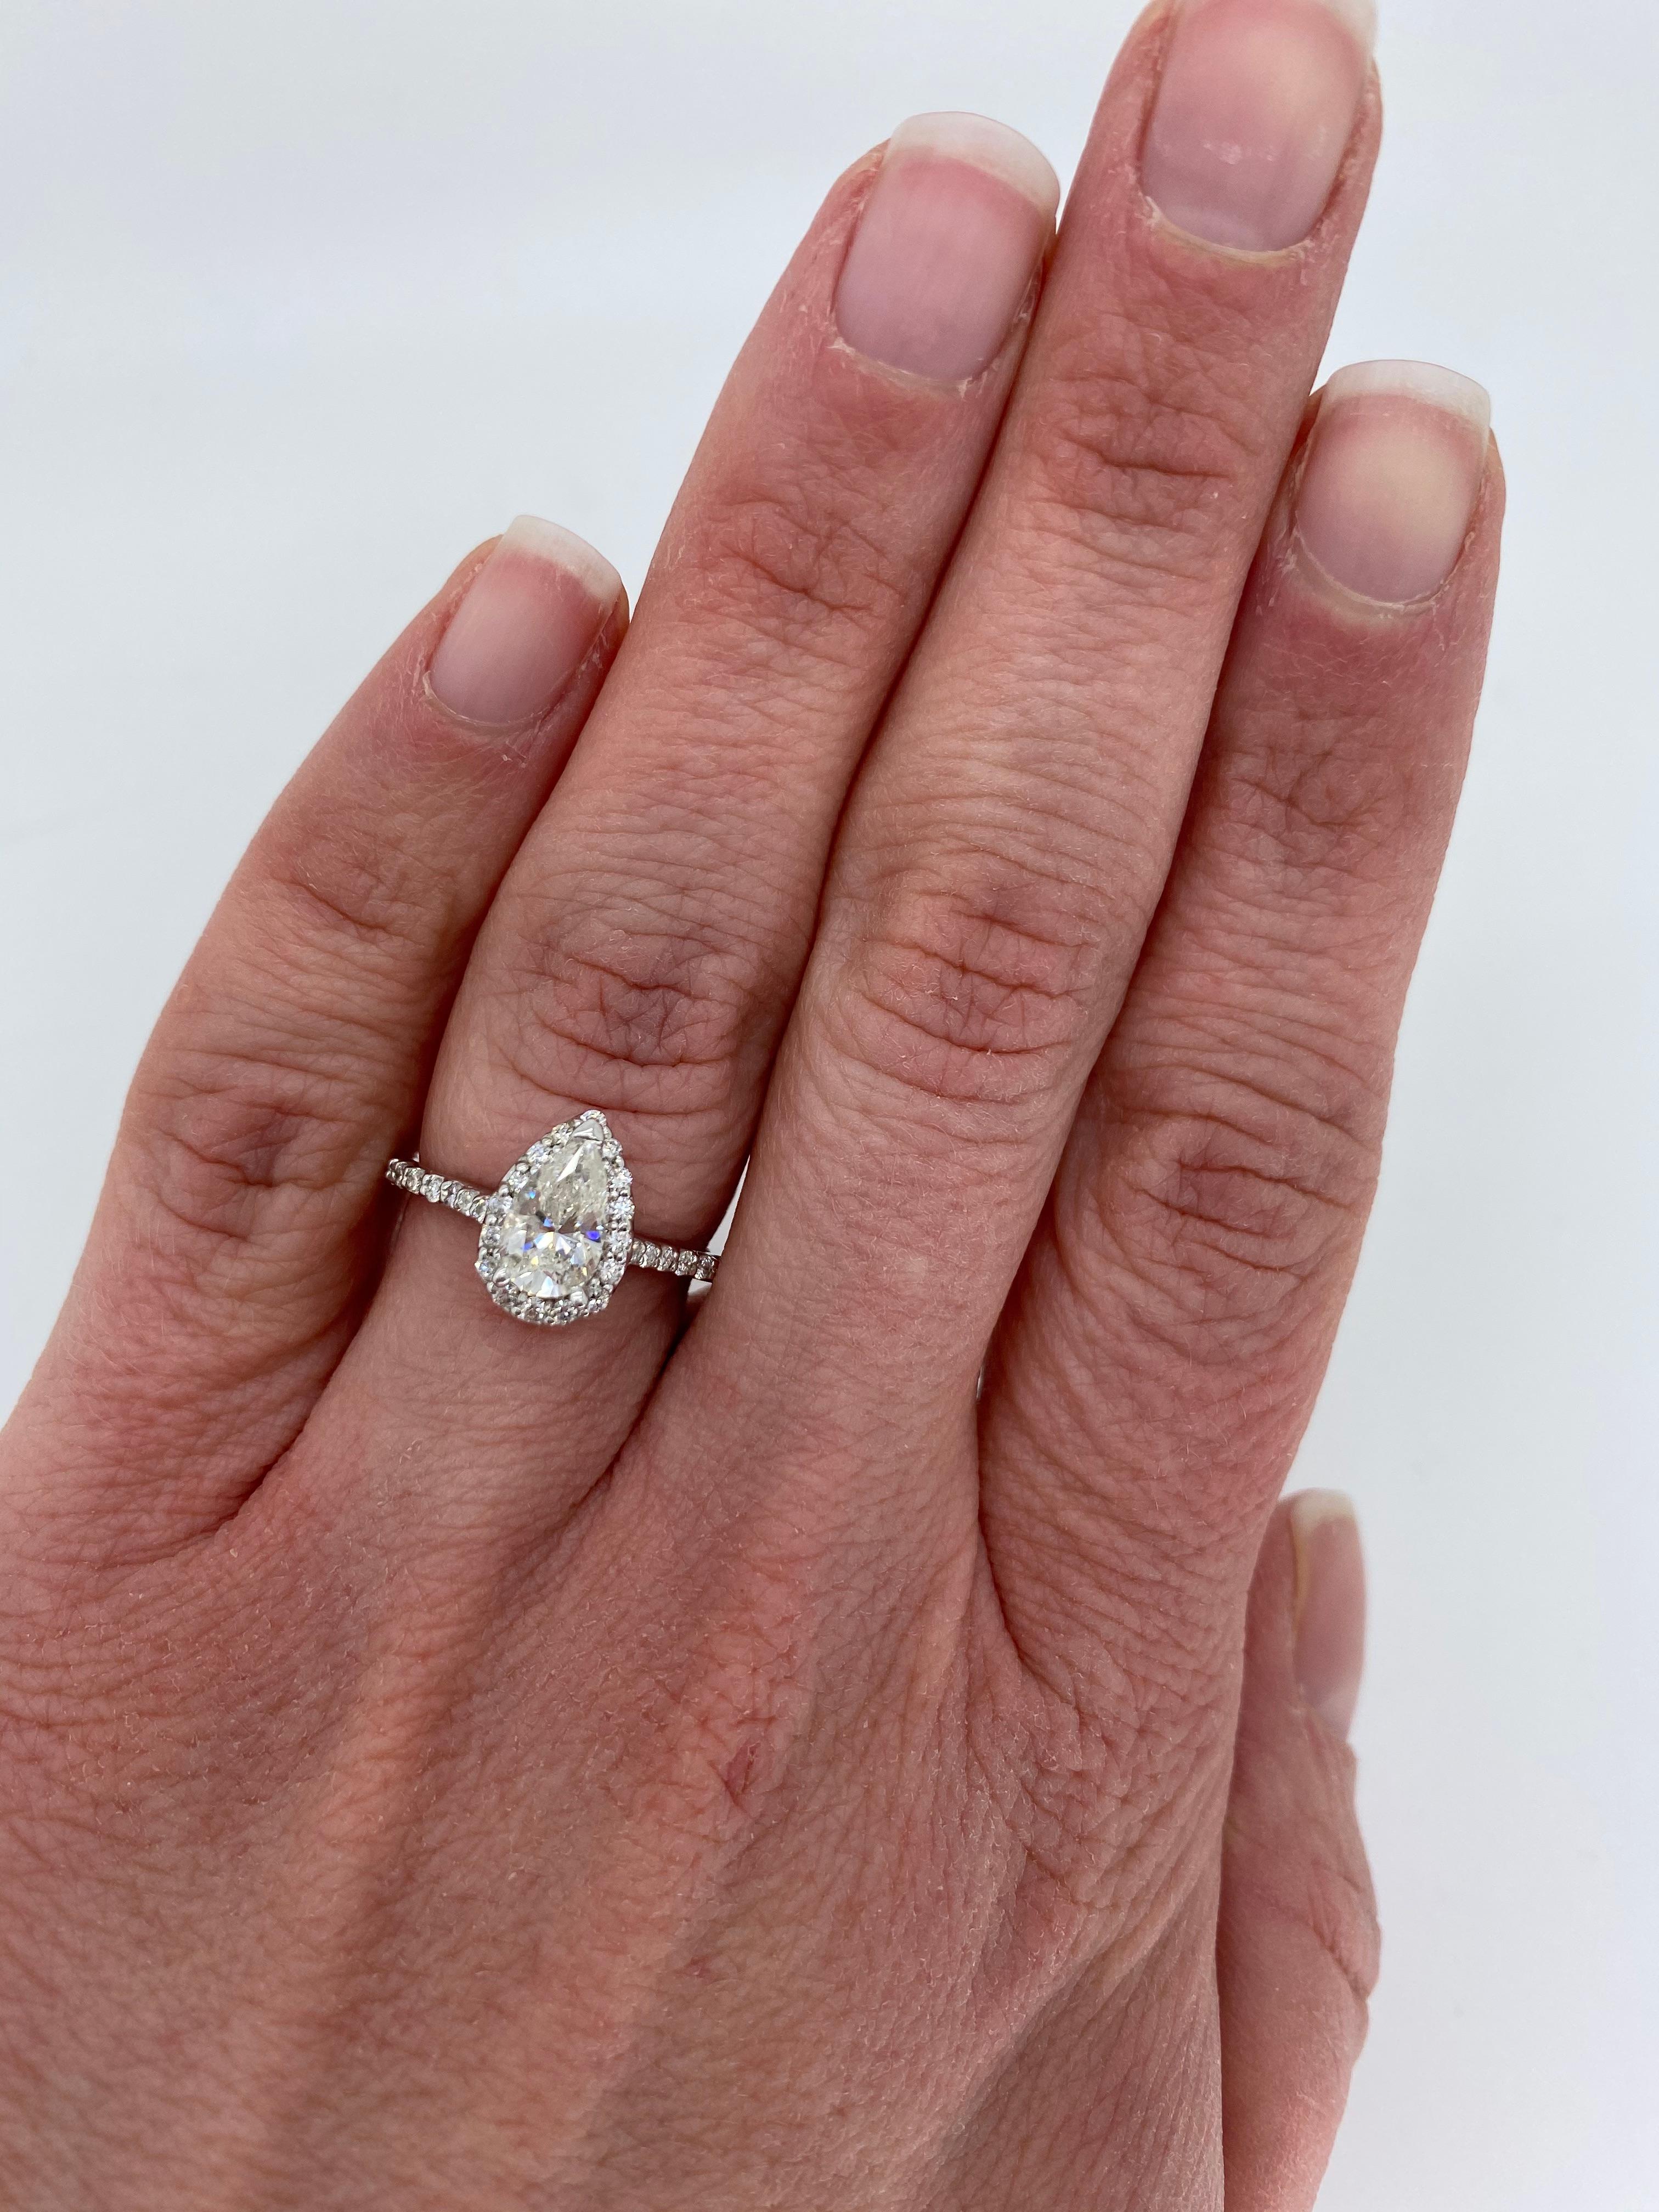 Pear shaped halo diamond ring crafted in 14k white gold. 

Center Diamond Carat Weight: Approximately .92CT
Center Diamond Cut: Pear Cut
Center Diamond Color: J
Center Diamond Clarity: I1
Total Diamond Carat Weight: Approximately 1.24CTW
Accent